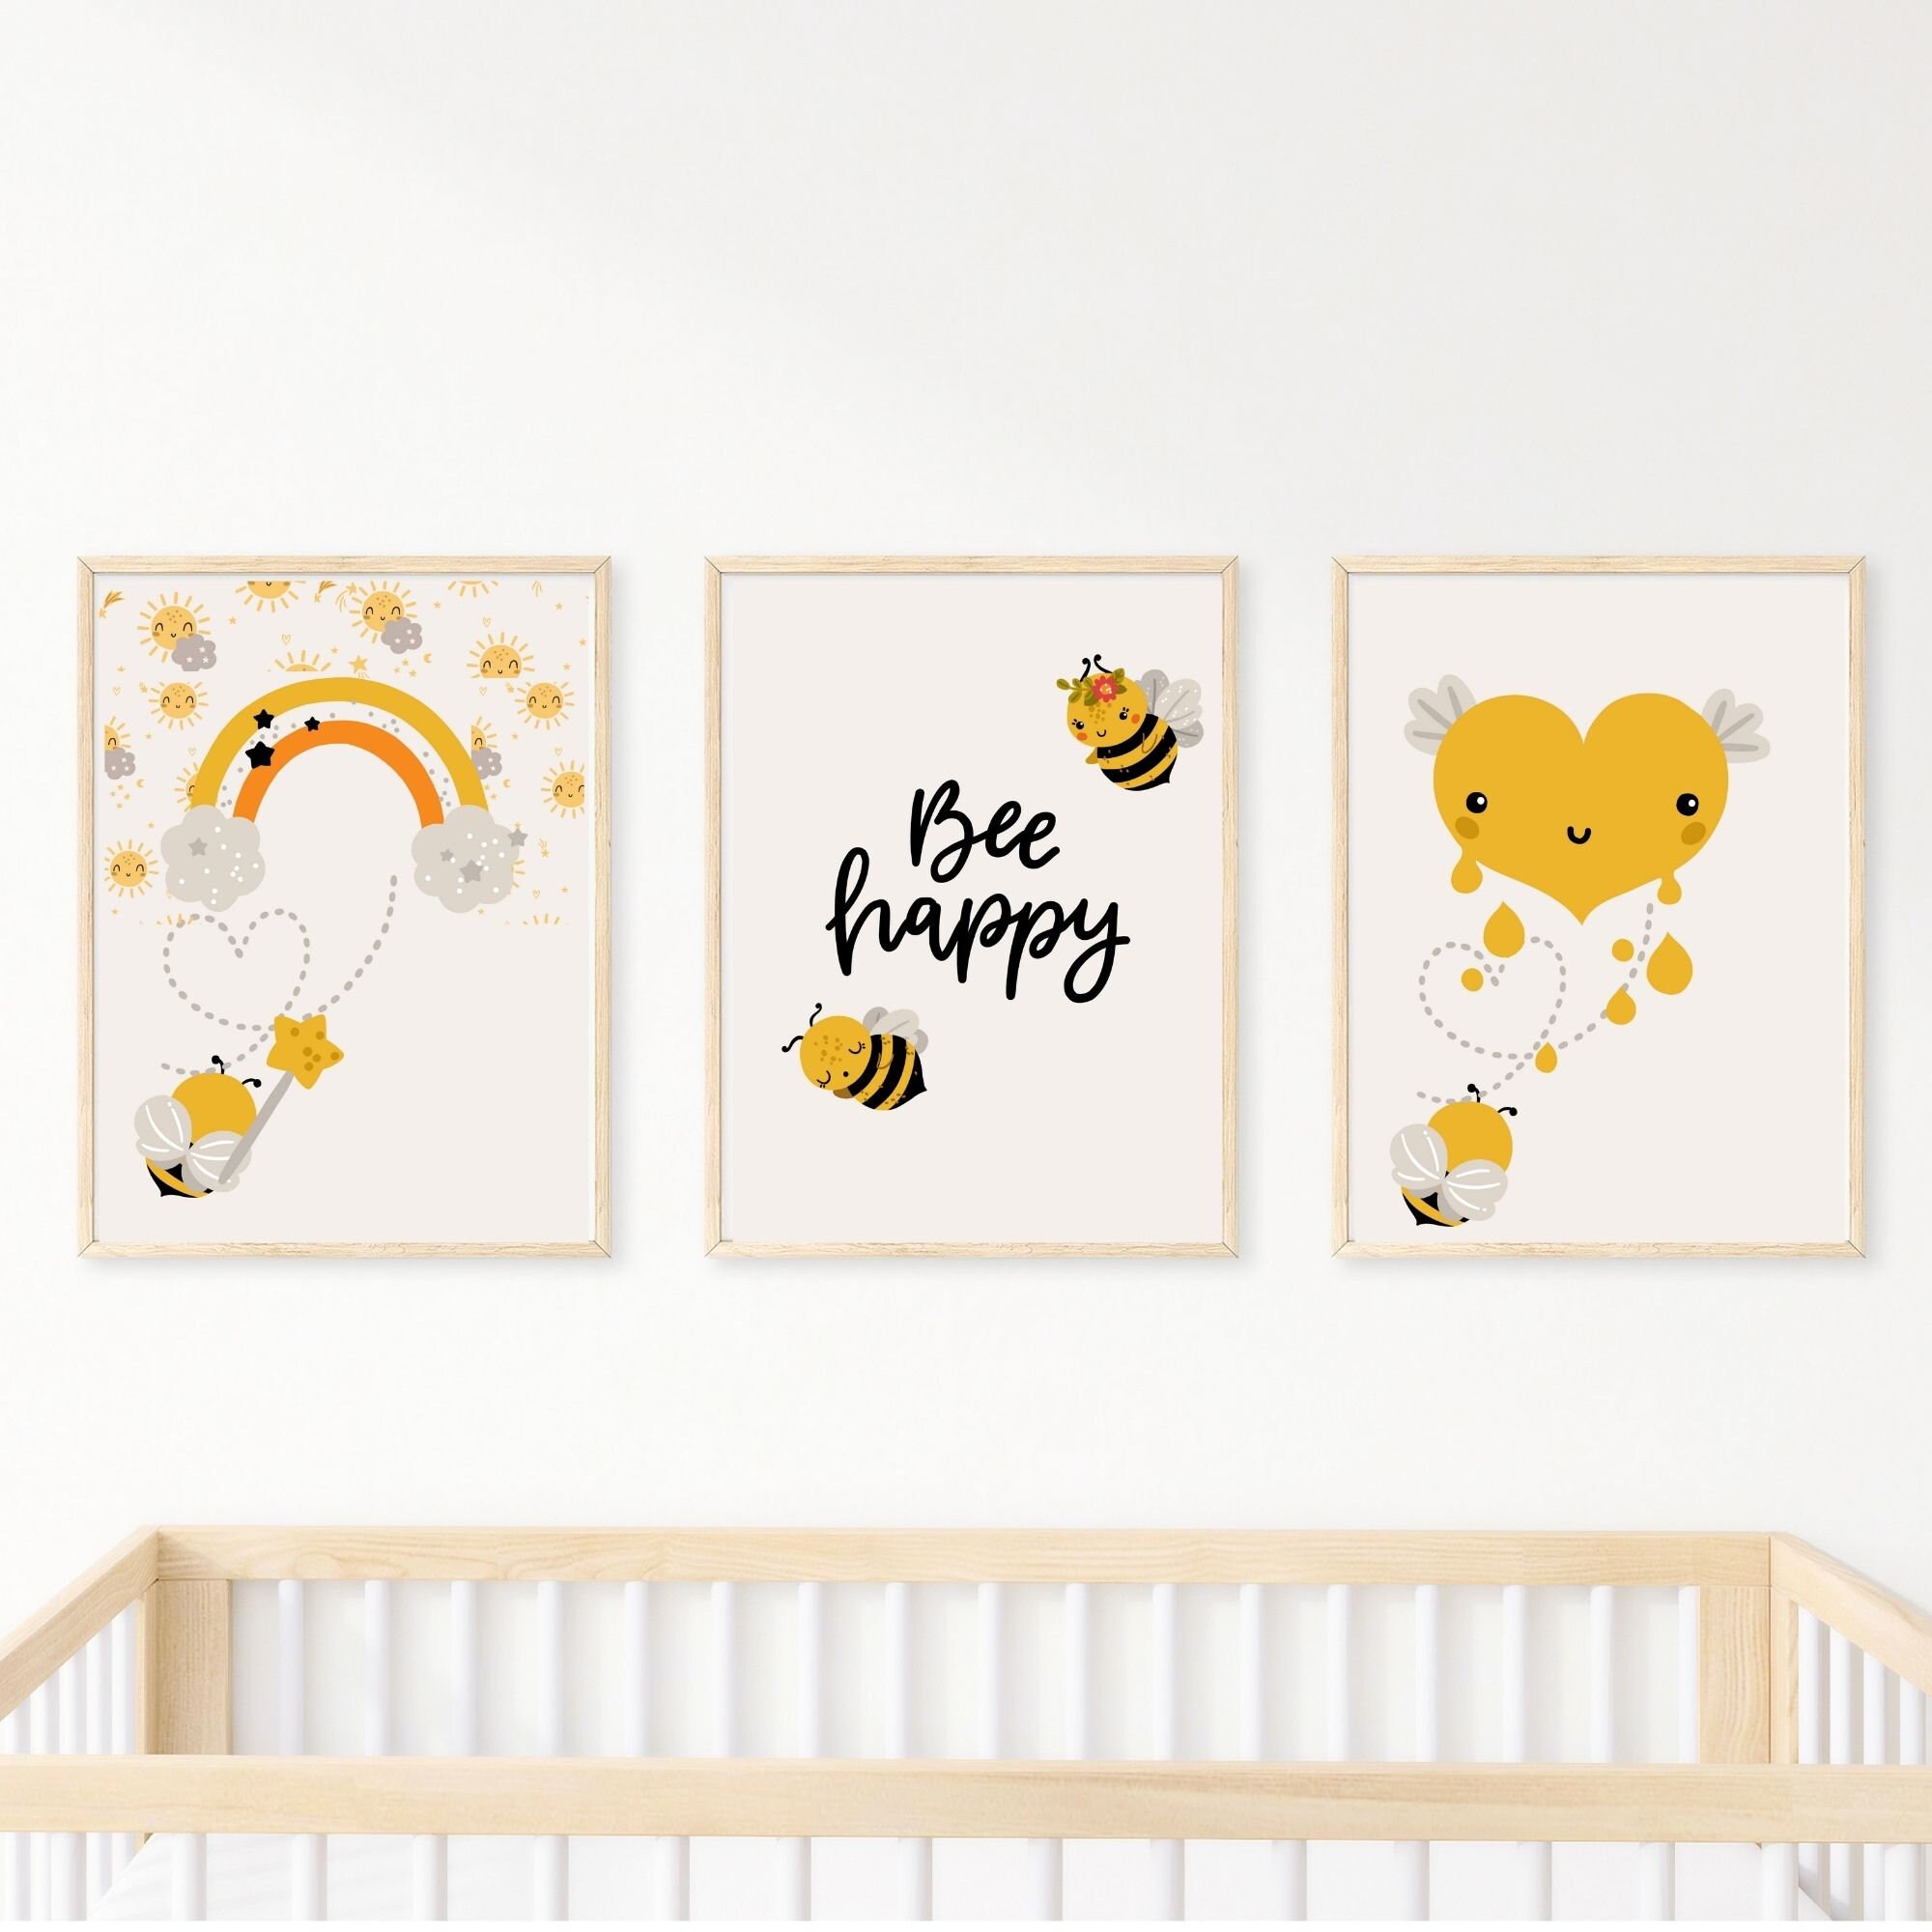 Set of 3 Happy Bees Prints. Perfect for Baby Nursery, Playroom or